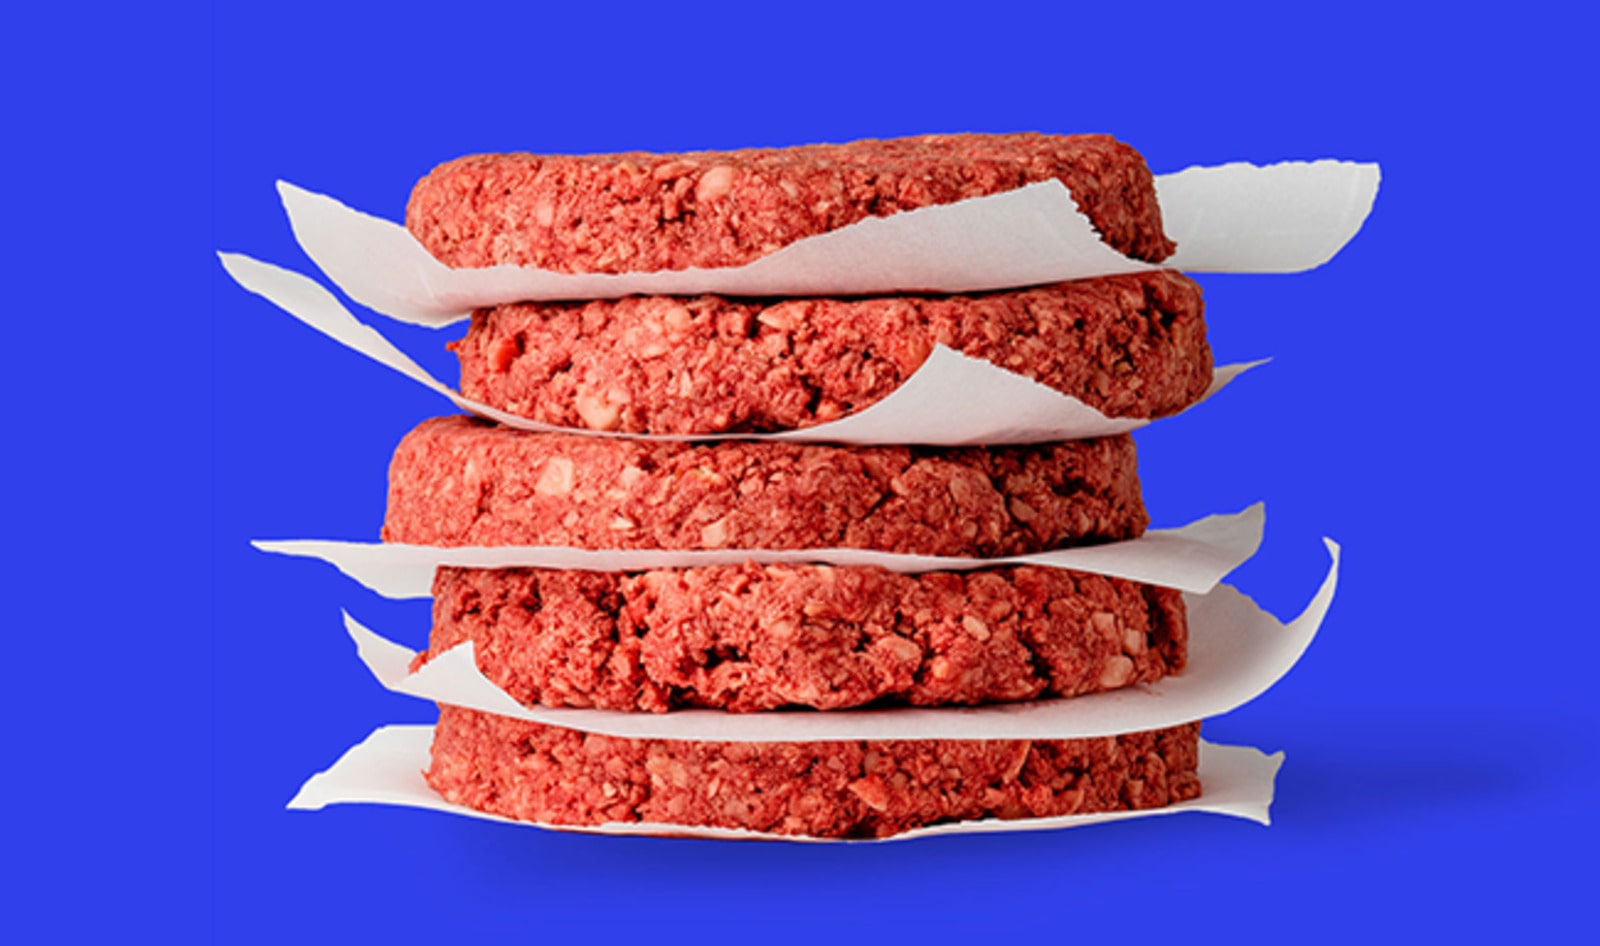 Plant-Based Impossible Burger Is Now Halal Certified